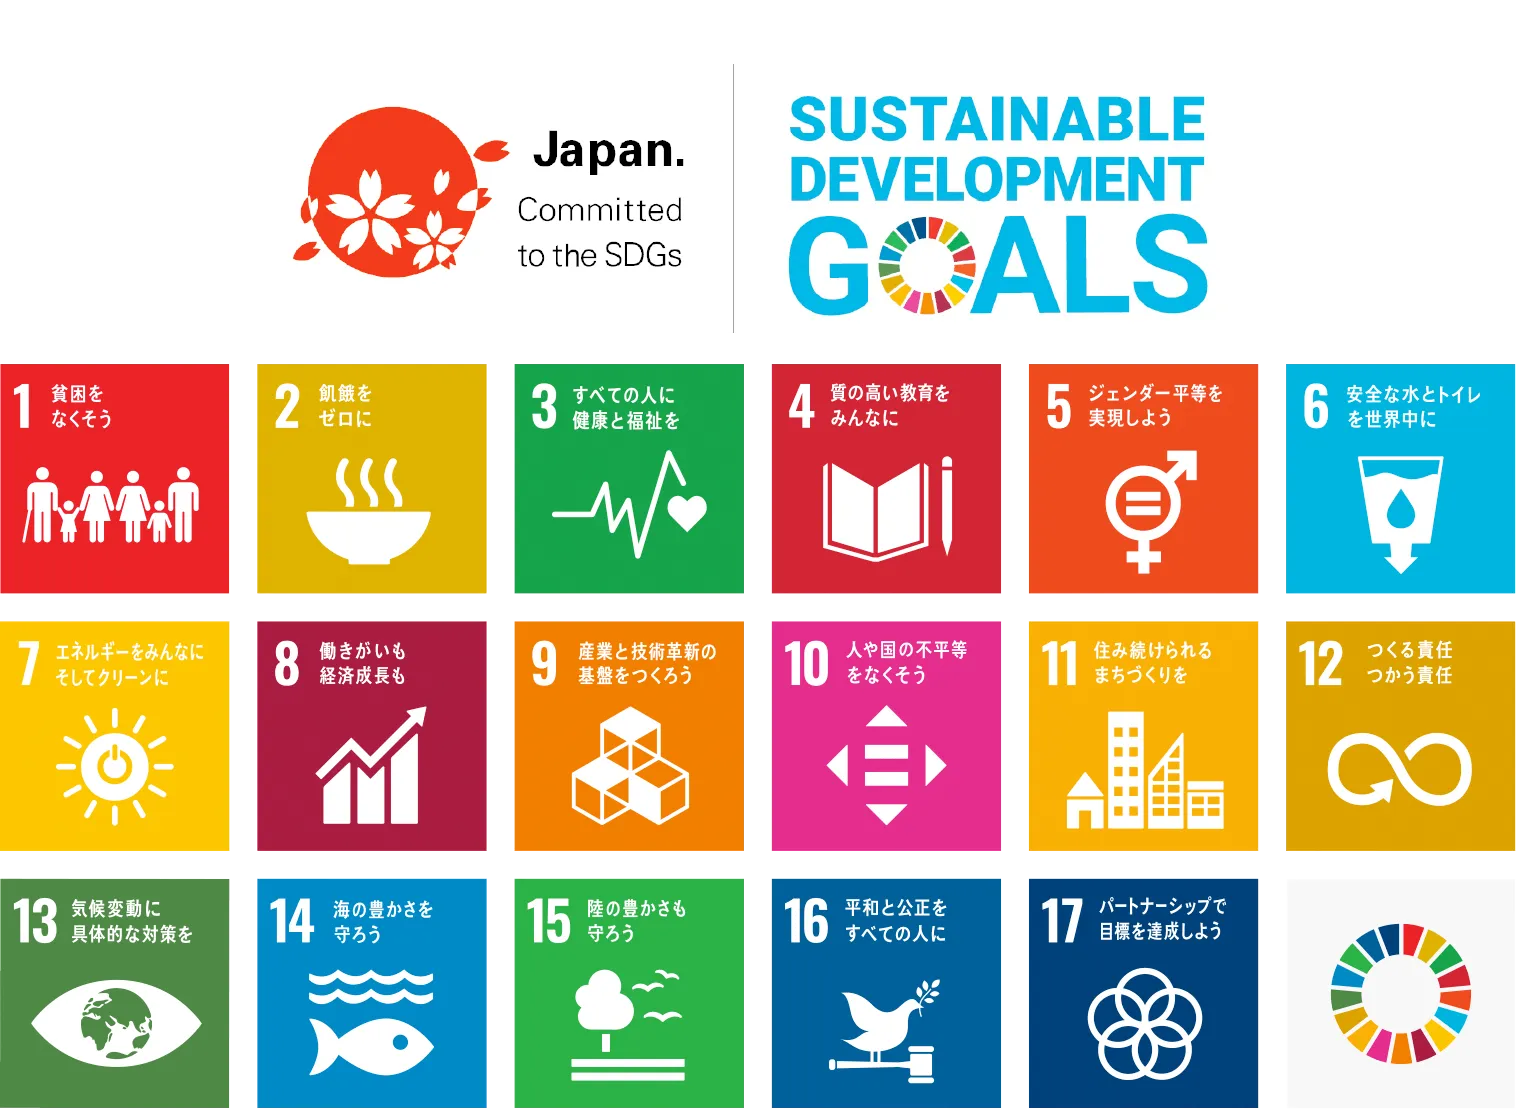 Japan.committed to the SDGs. sustainable development goals.